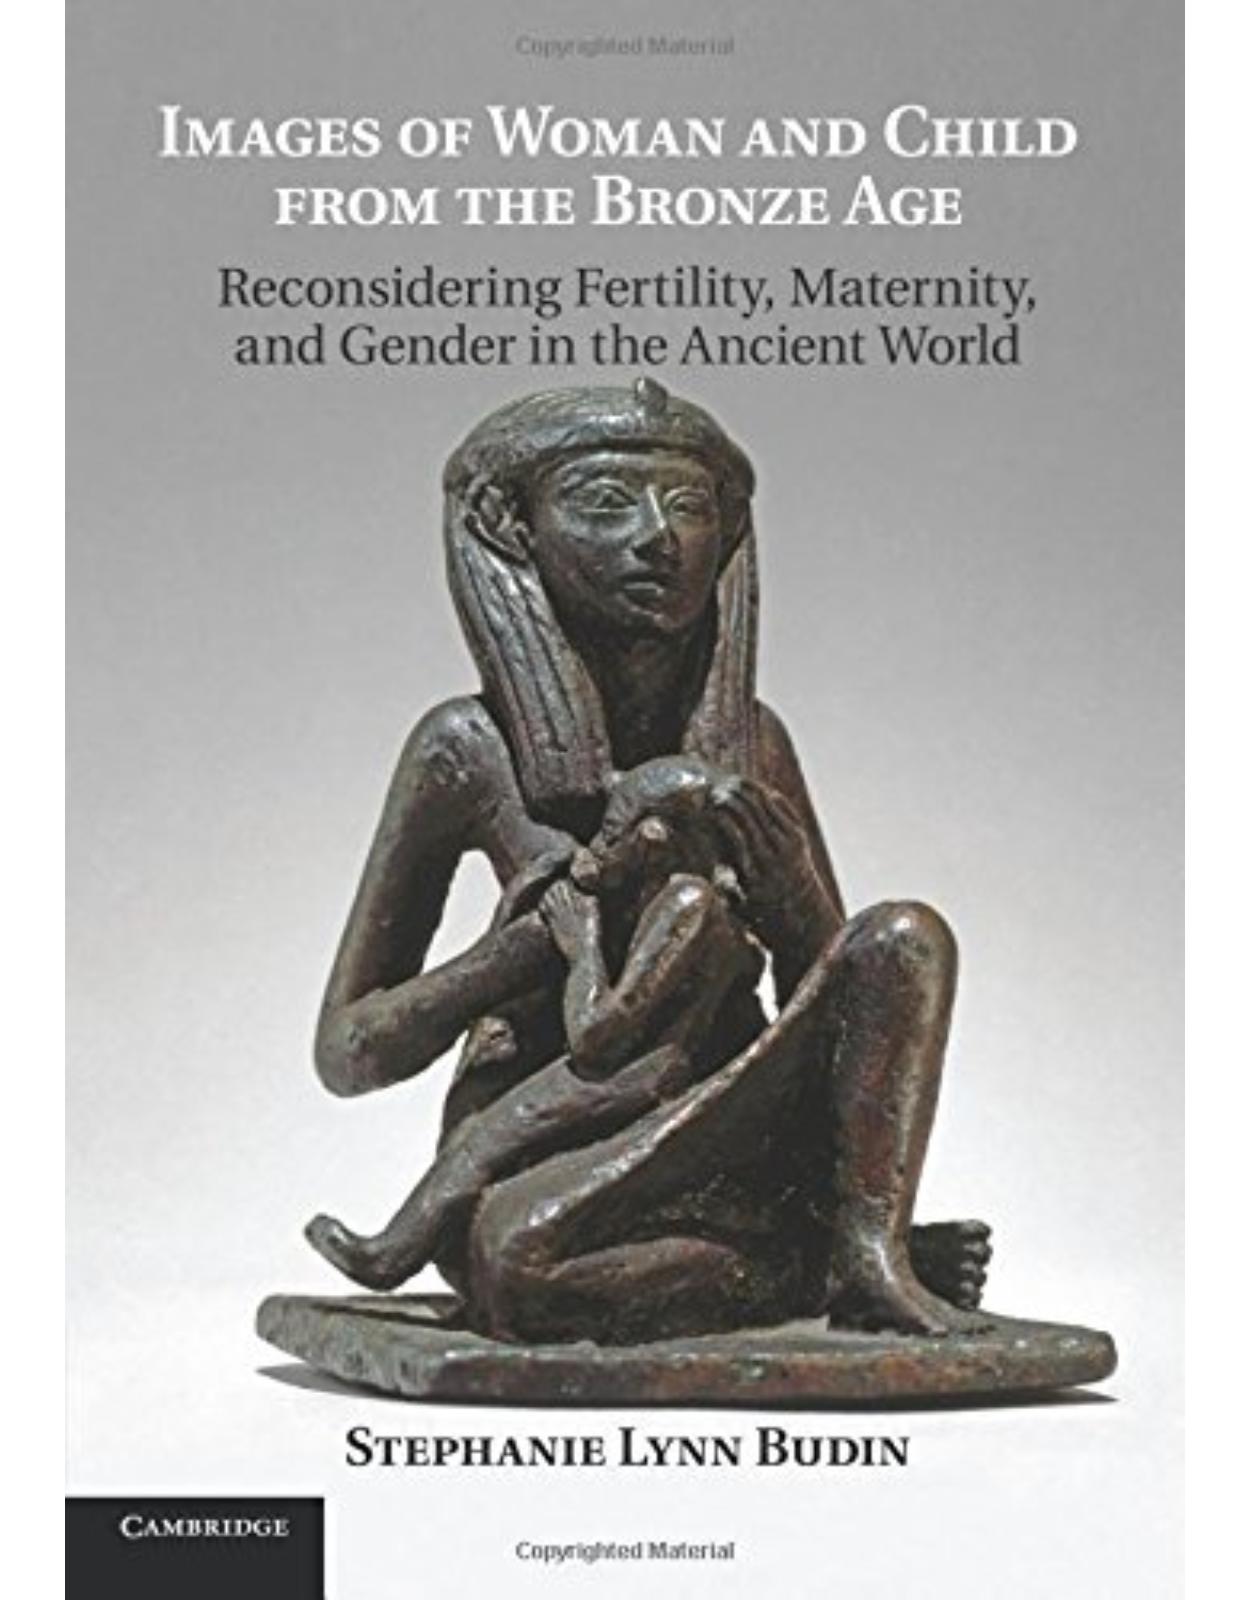 Images of Woman and Child from the Bronze Age: Reconsidering Fertility, Maternity, and Gender in the Ancient World